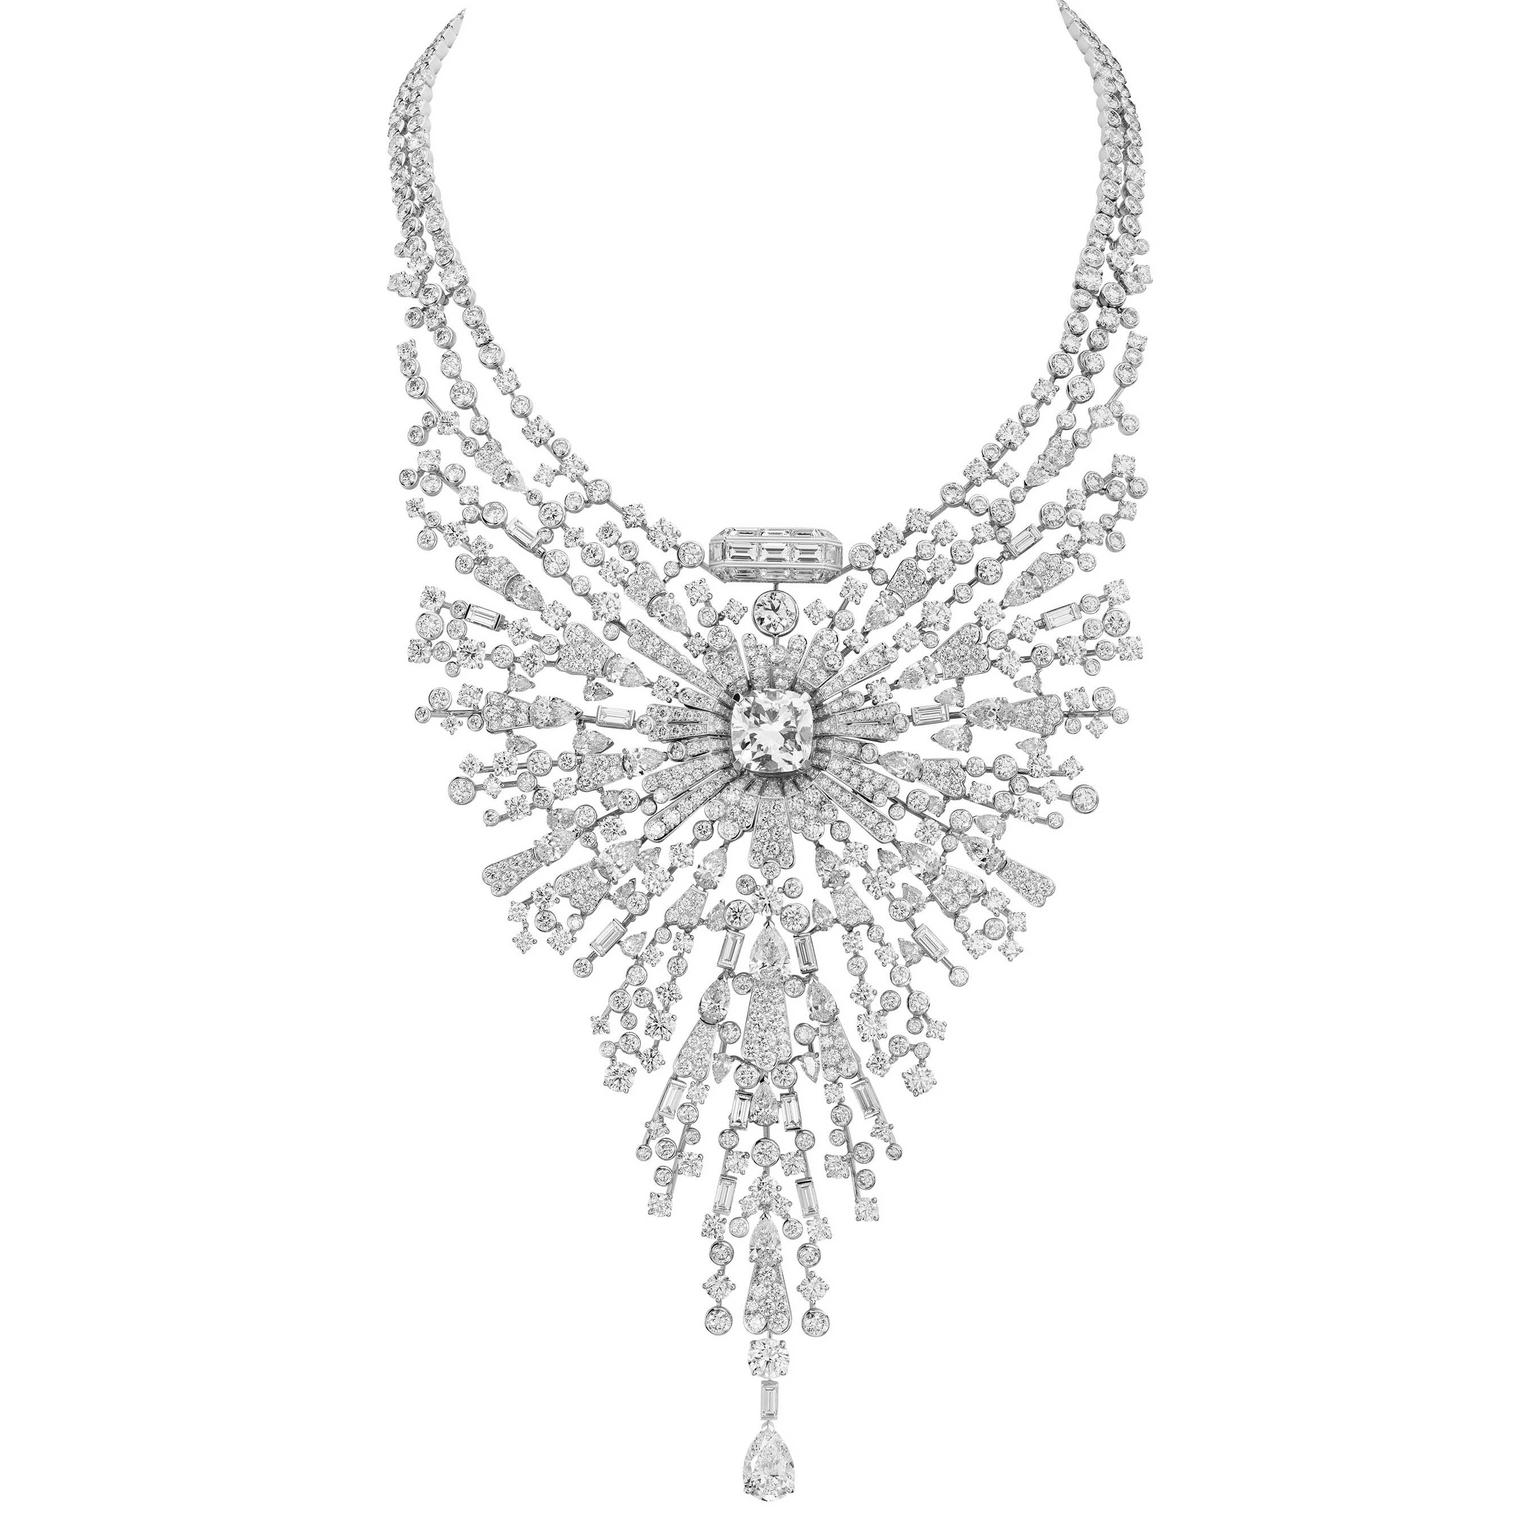 Chanel Collection No 5 Sillage necklace, Chanel